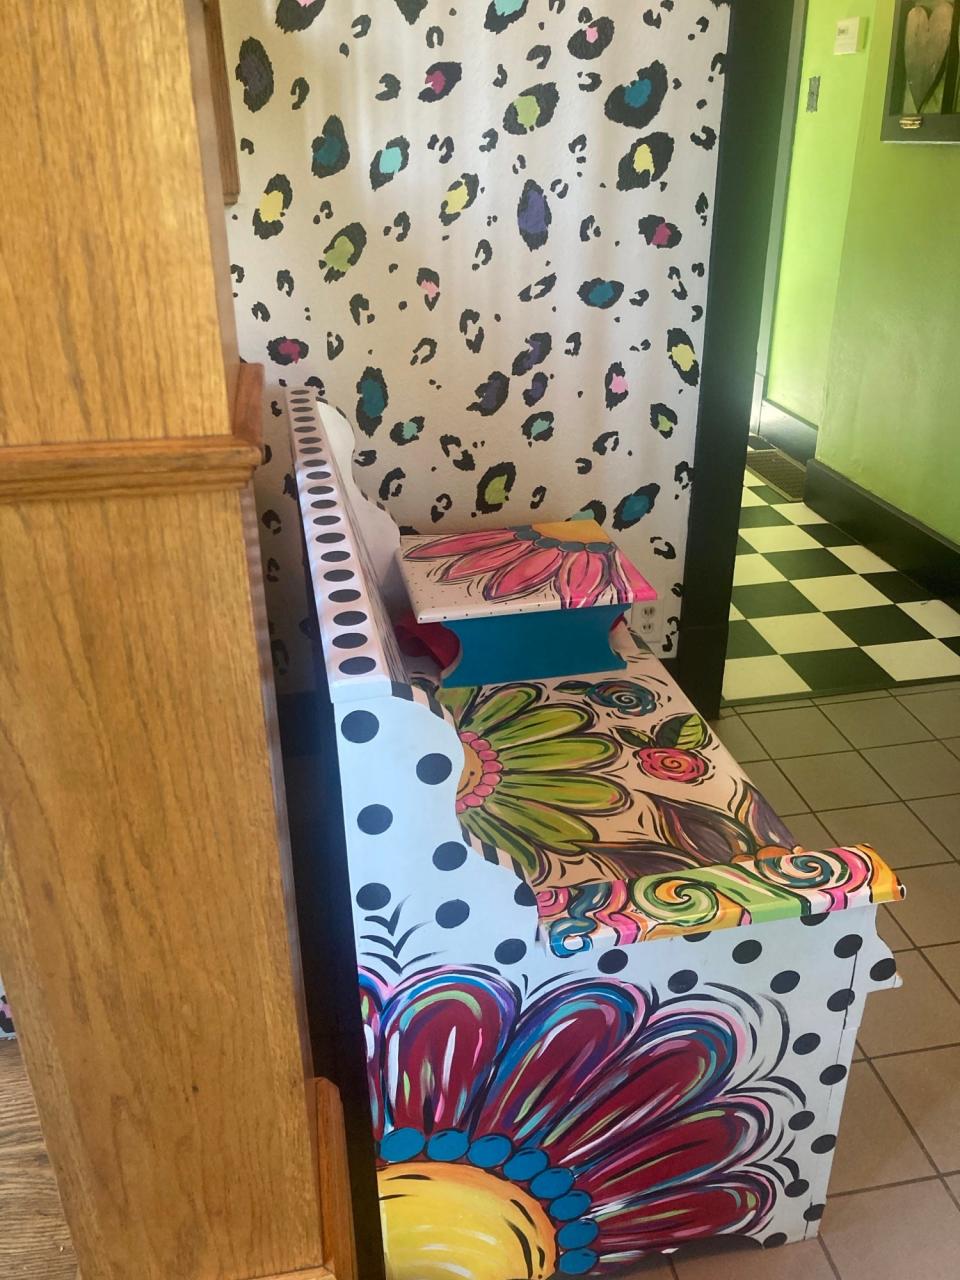 A brightly-painted bench sits in the Be Lovely House, a residential component of the Wooden It Be Lovely program started at Douglas Avenue United Methodist Church nine years ago. Up to four women who are recovering from forms of addiction or who have experienced poverty or abuse are expected to live in the house. The women work for Wooden It Be Lovely, which refurbishes furniture, among other activities.